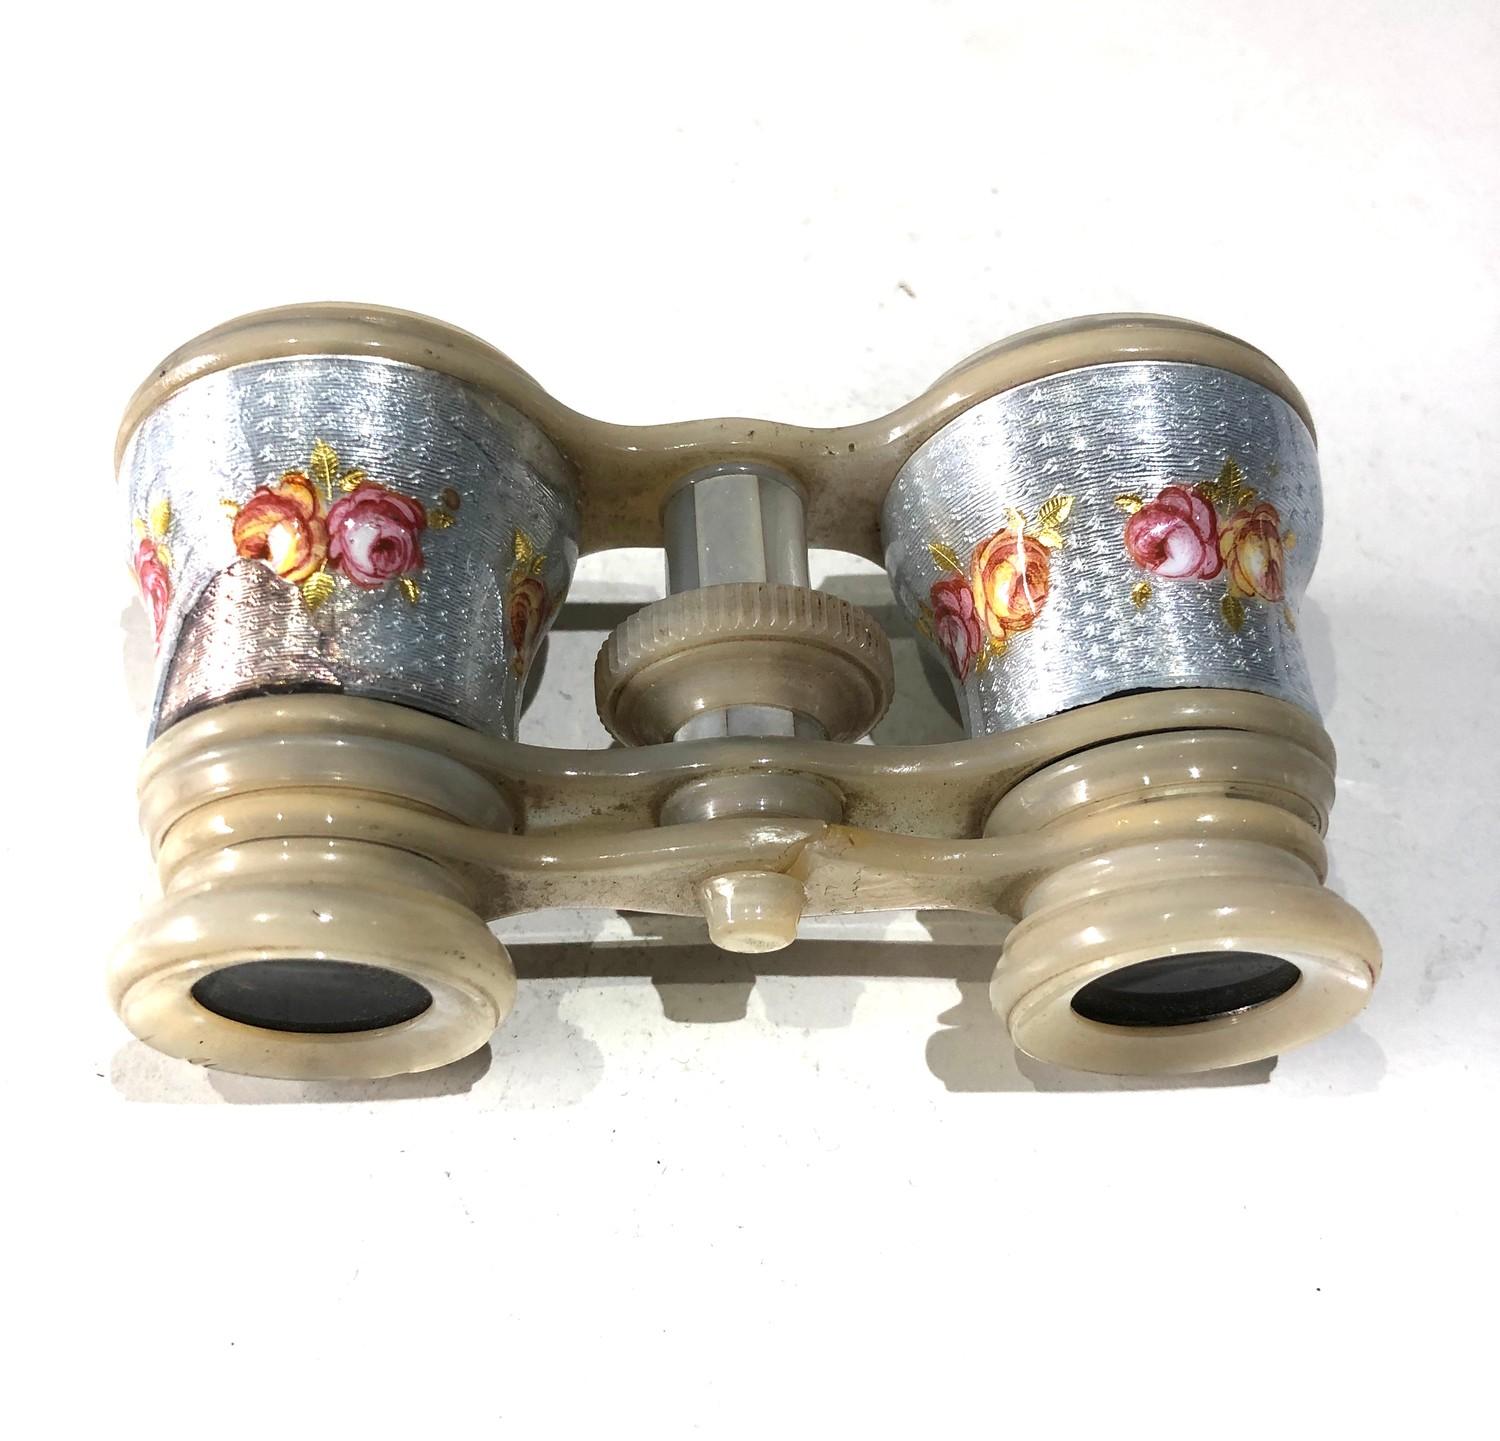 2 antique enamel opera glasses age related wear and damage as shown please see images for details as - Image 7 of 10